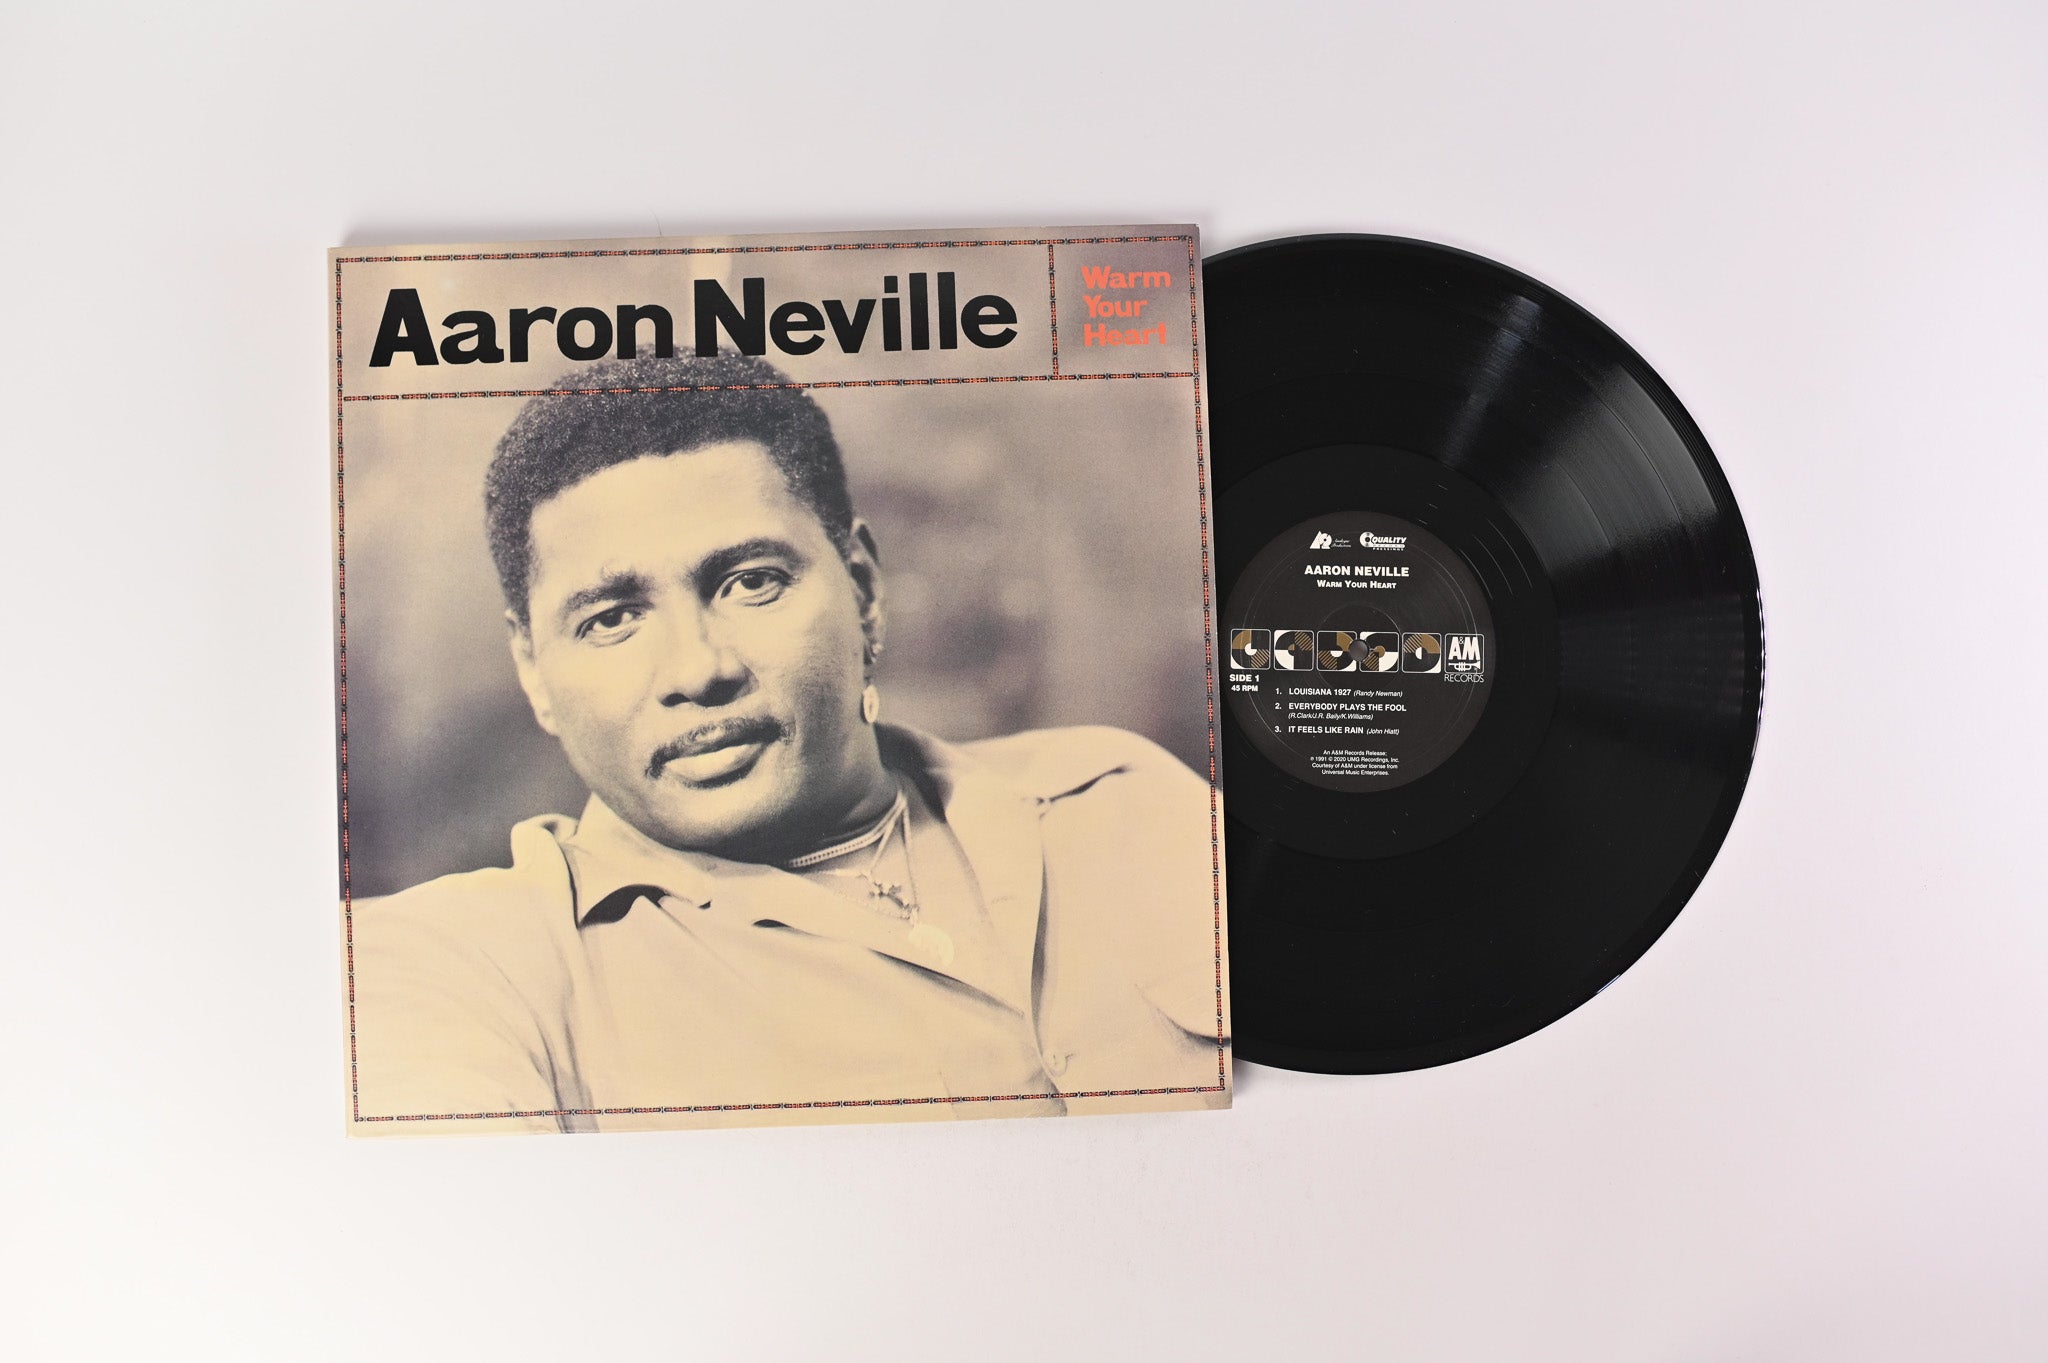 Aaron Neville - Warm Your Heart on Analogue Productions Ltd Remastered Reissue